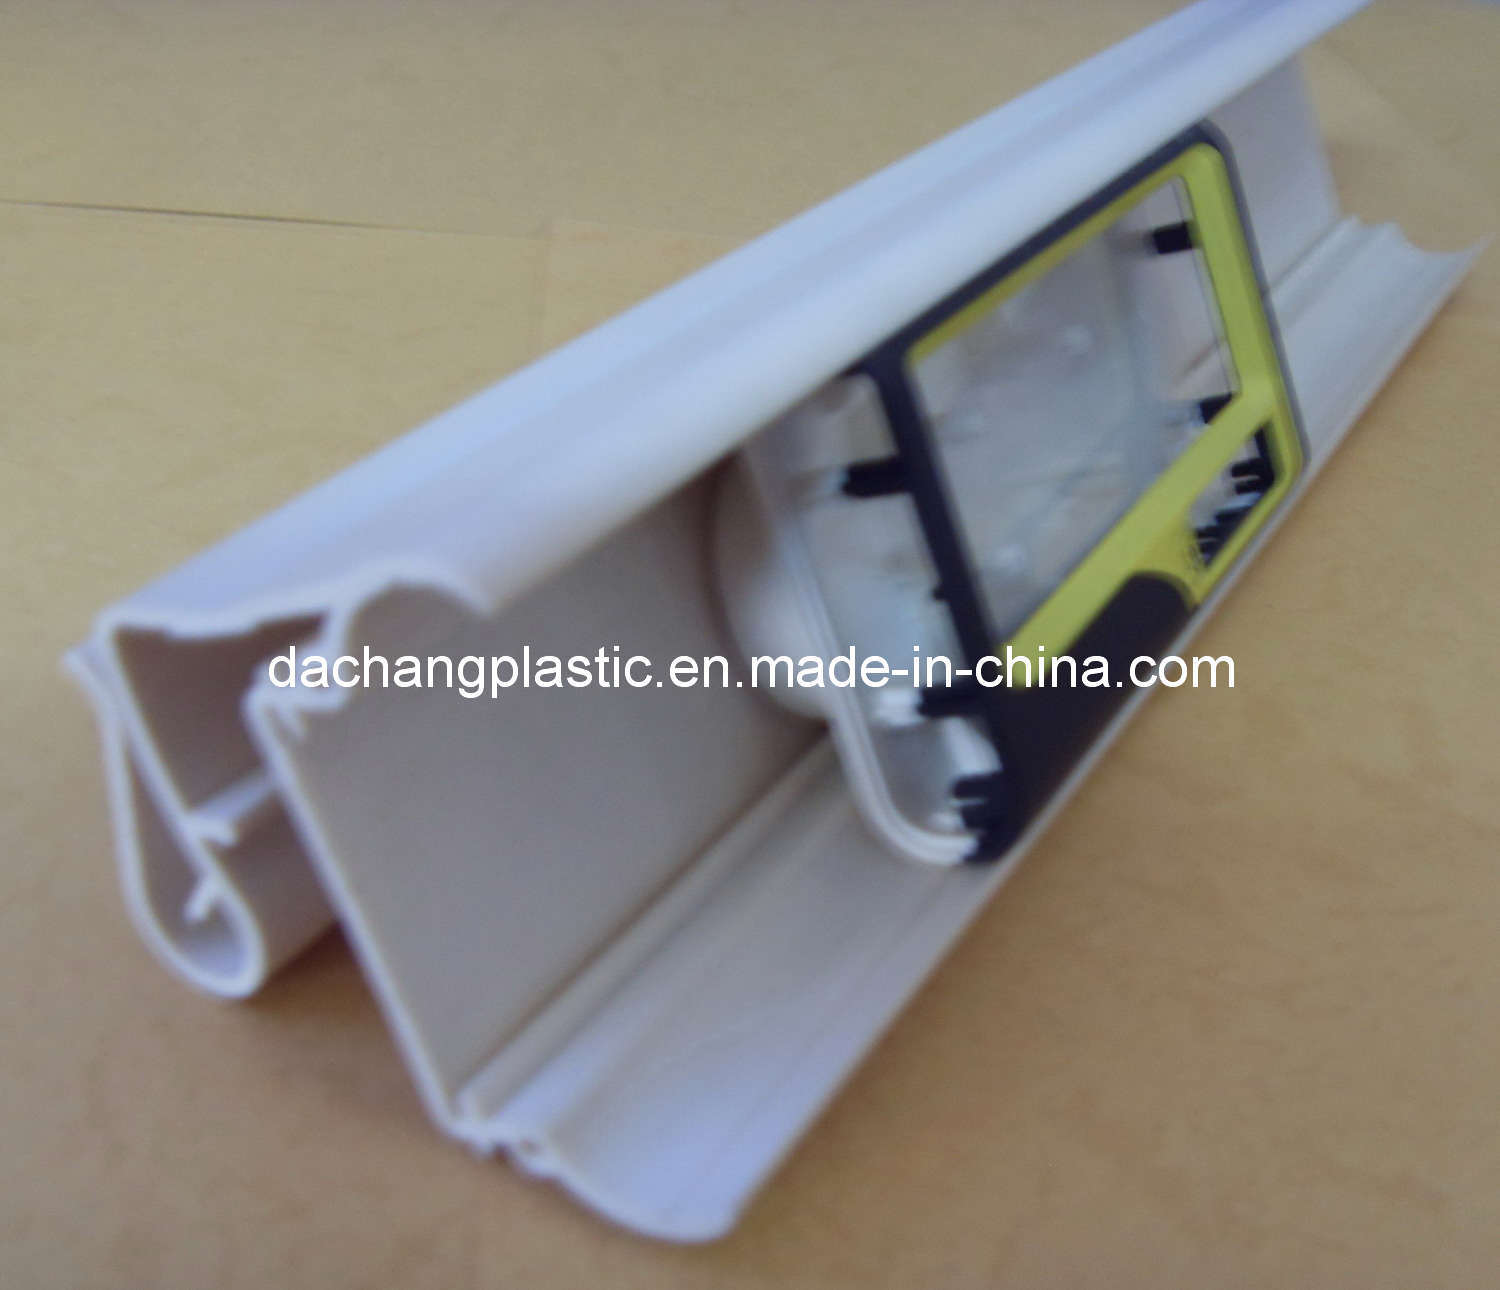 Plastic Coextrusion Channel for Electronic Price Tag